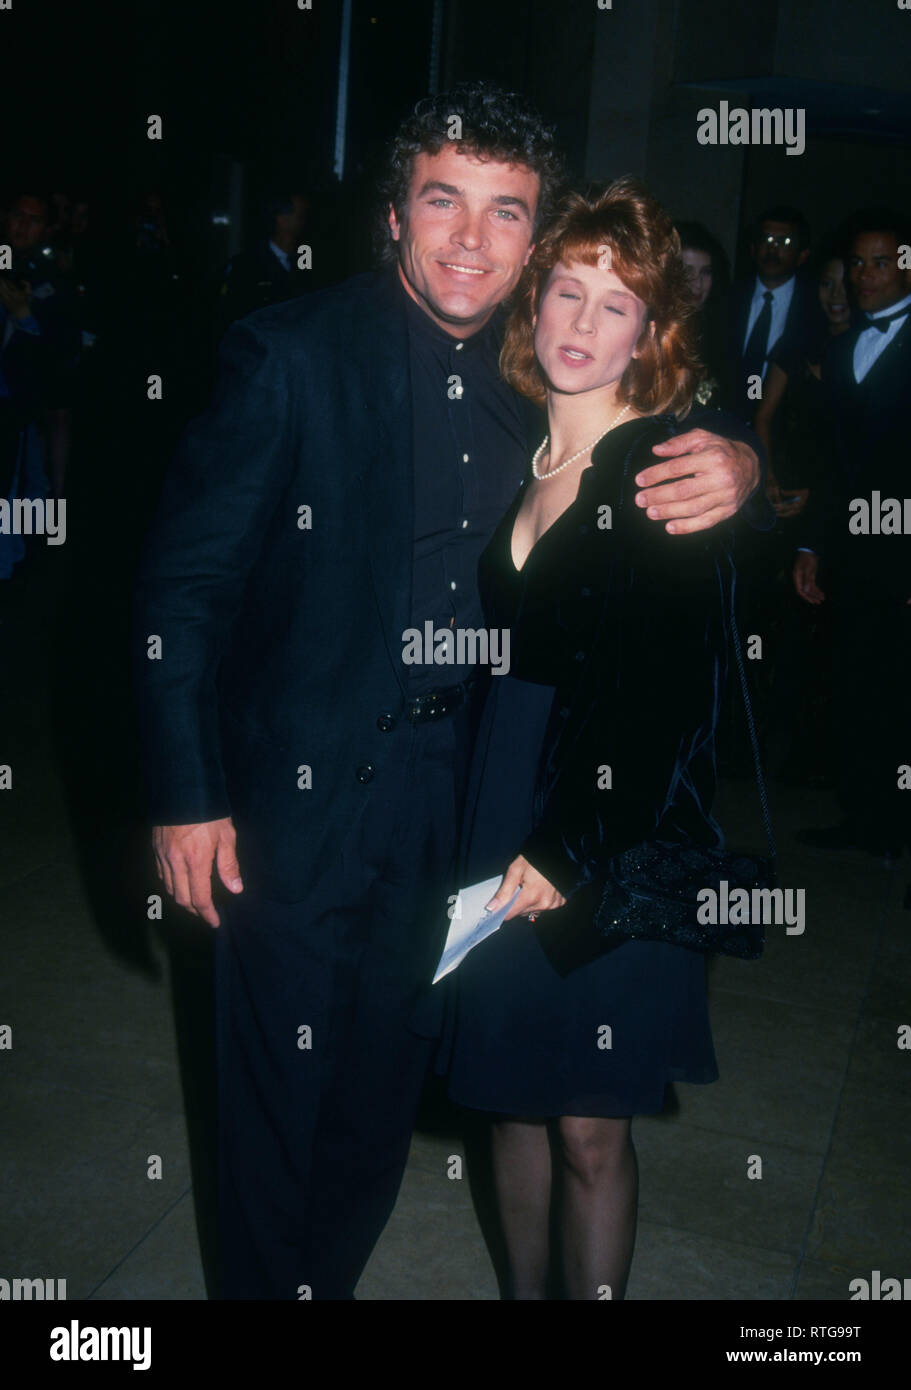 BEVERLY HILLS, CA - FEBRUARY 4: Actor John J. York and wife Vicki Manners attend the 10th Annual Soap Opera Digest Awards on February 4, 1994 at Beverly Hilton Hotel in Beverly Hills, California. Photo by Barry King/Alamy Stock Photo Stock Photo